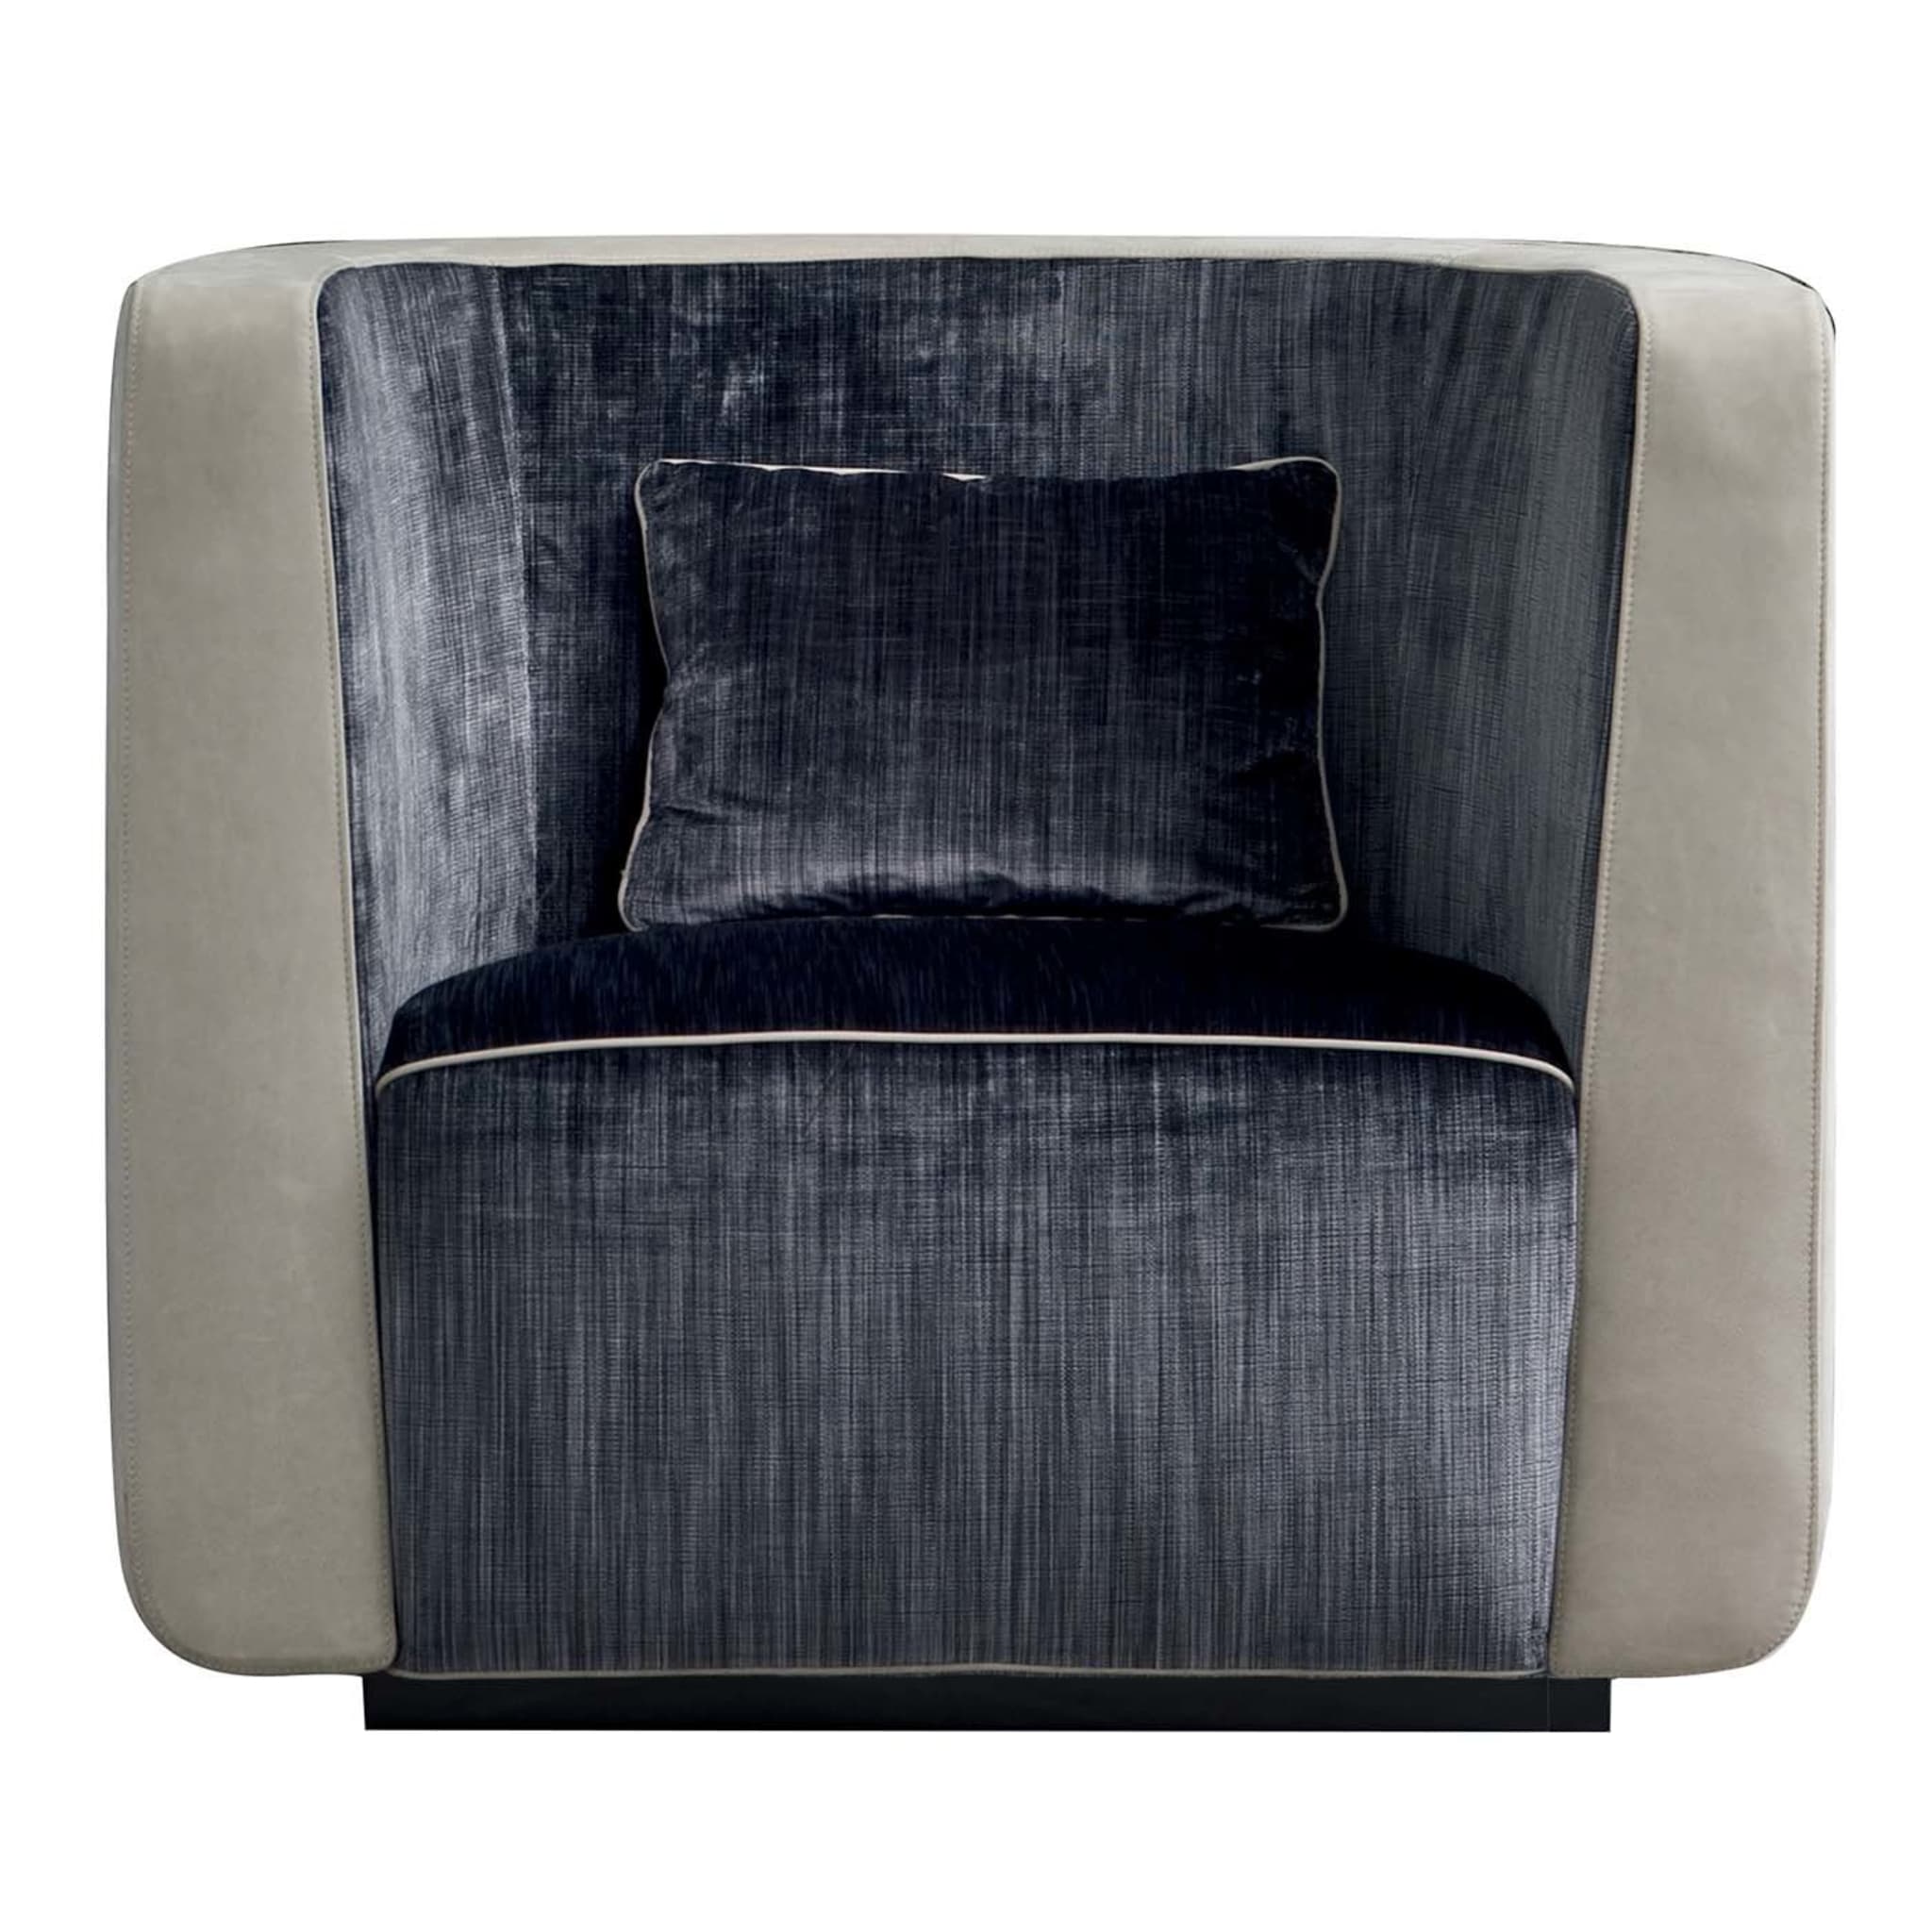 Ponza Blue and Gray Swivel Armchair - Main view